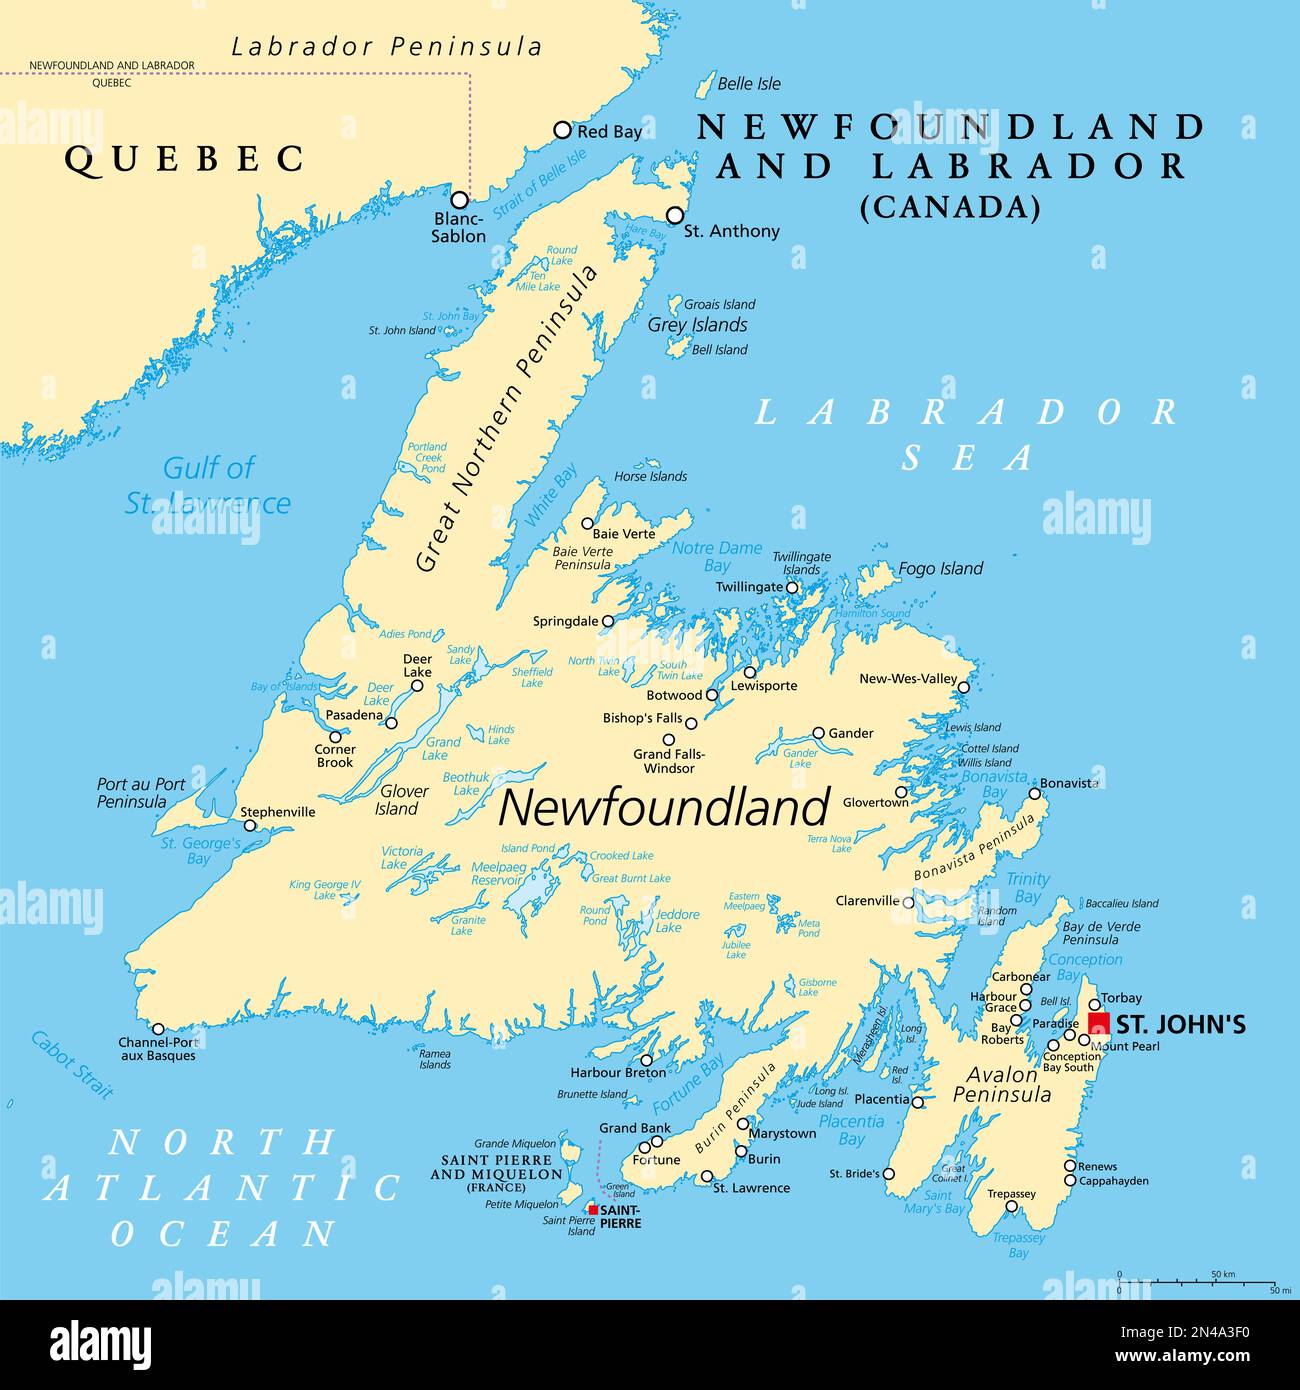 Island of Newfoundland, political map. Part of Canadian province of Newfoundland and Labrador with capital St. John's. Large island. Stock Photo